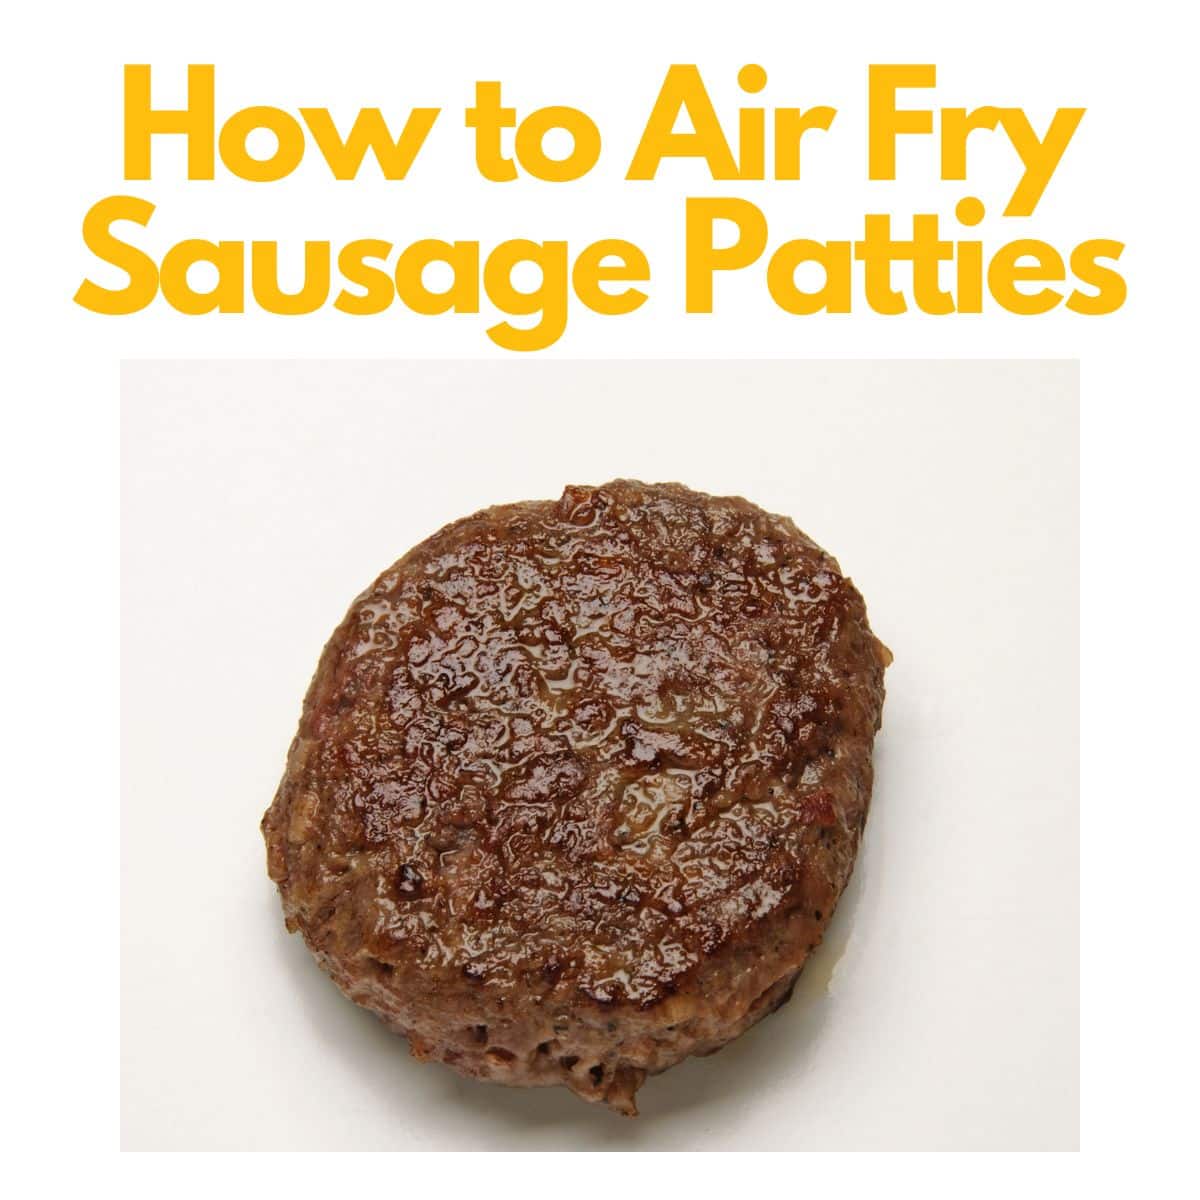 A single cooked sausage patty on a white background with the text "How to Air Fry Sausage Patties" written above the patty in yellow.